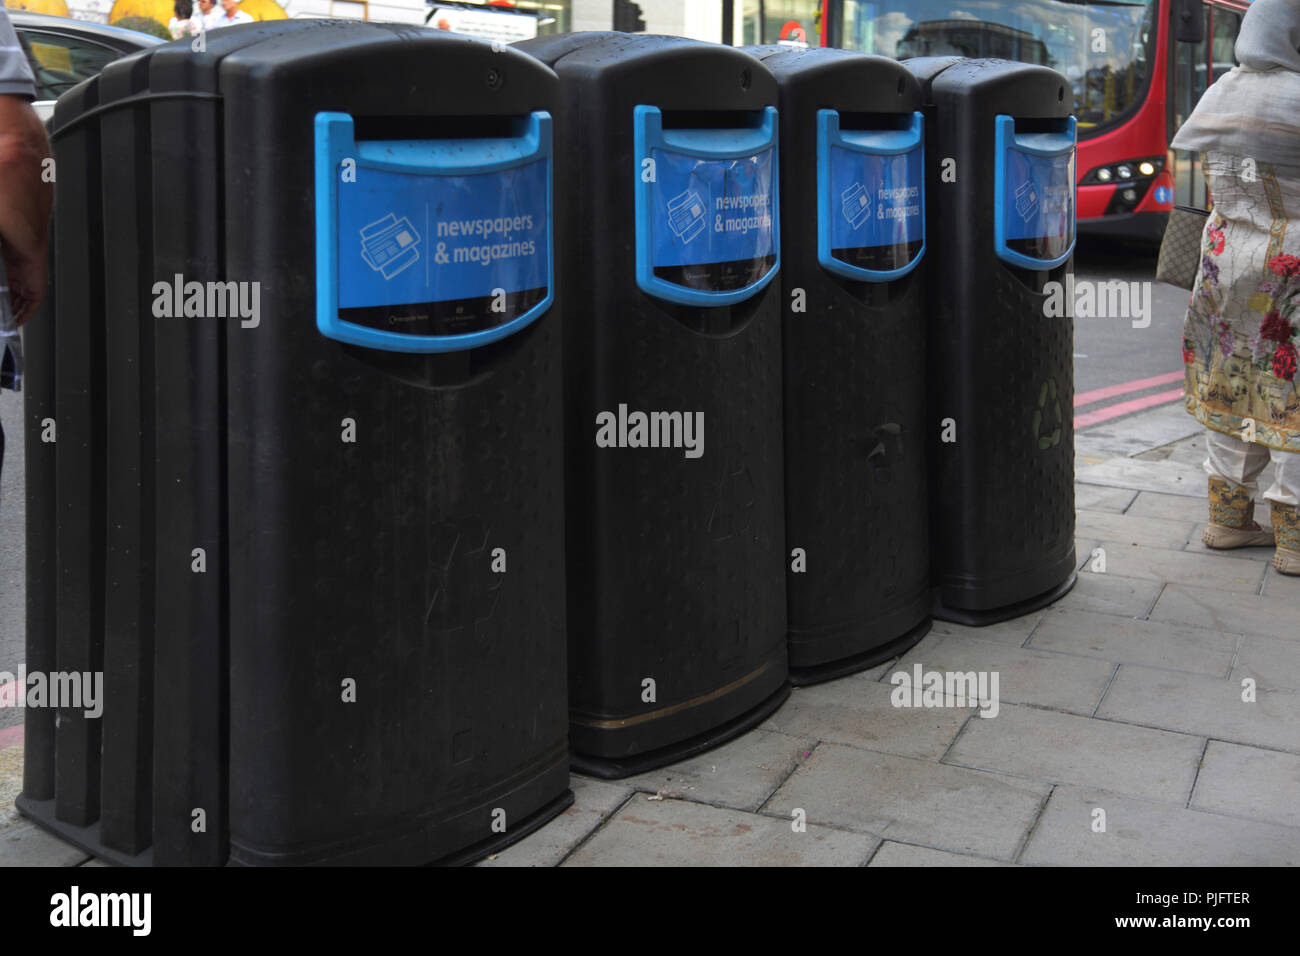 Victoria Street Westminster London England Newspaper and Magazines Recycle Bins Stock Photo